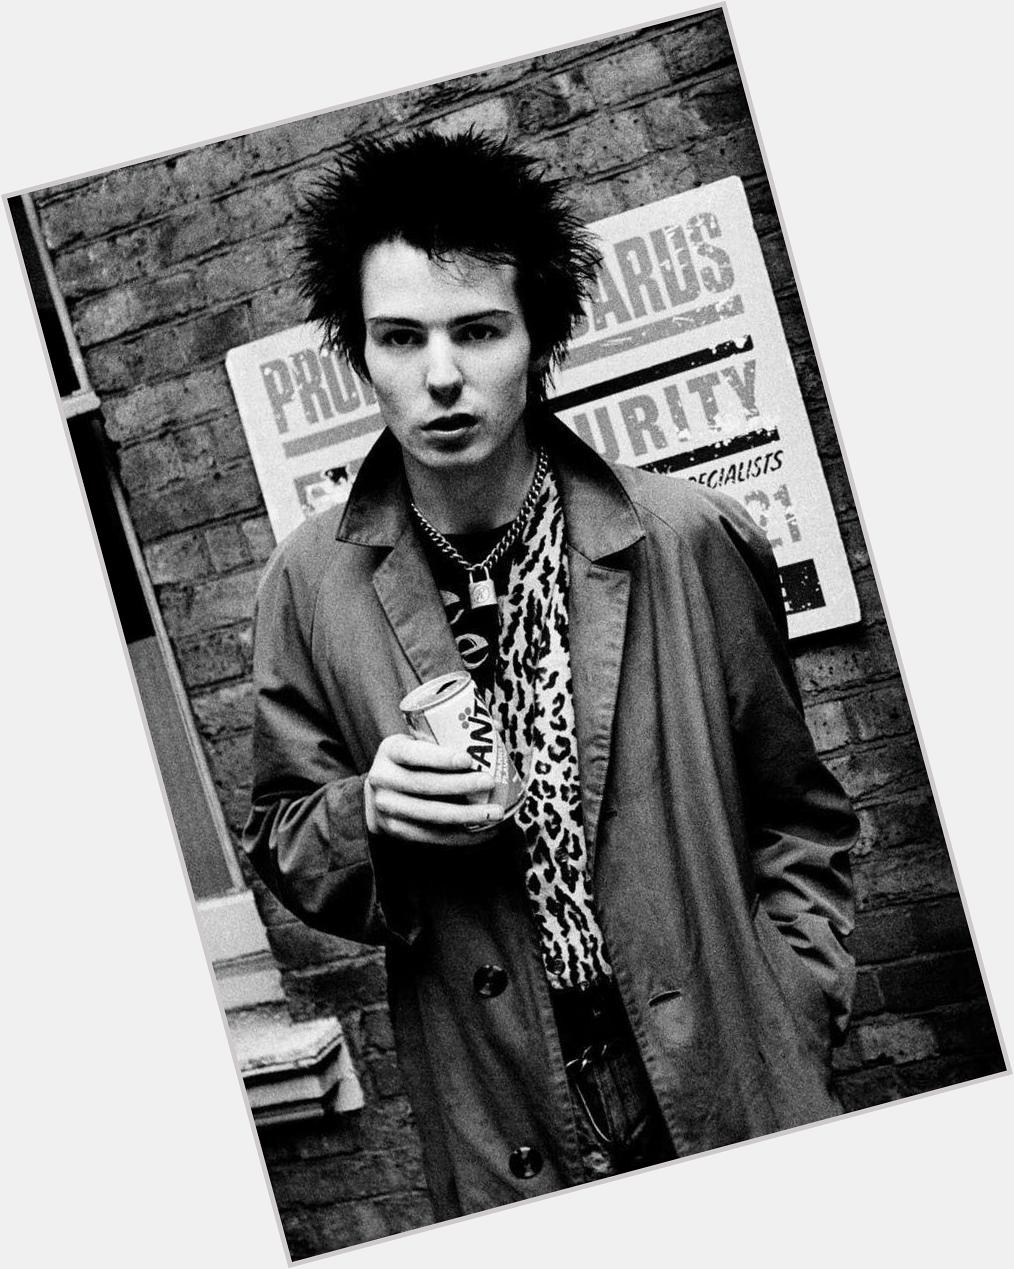 Happy birthday Sid Vicious! Rest in peace.  